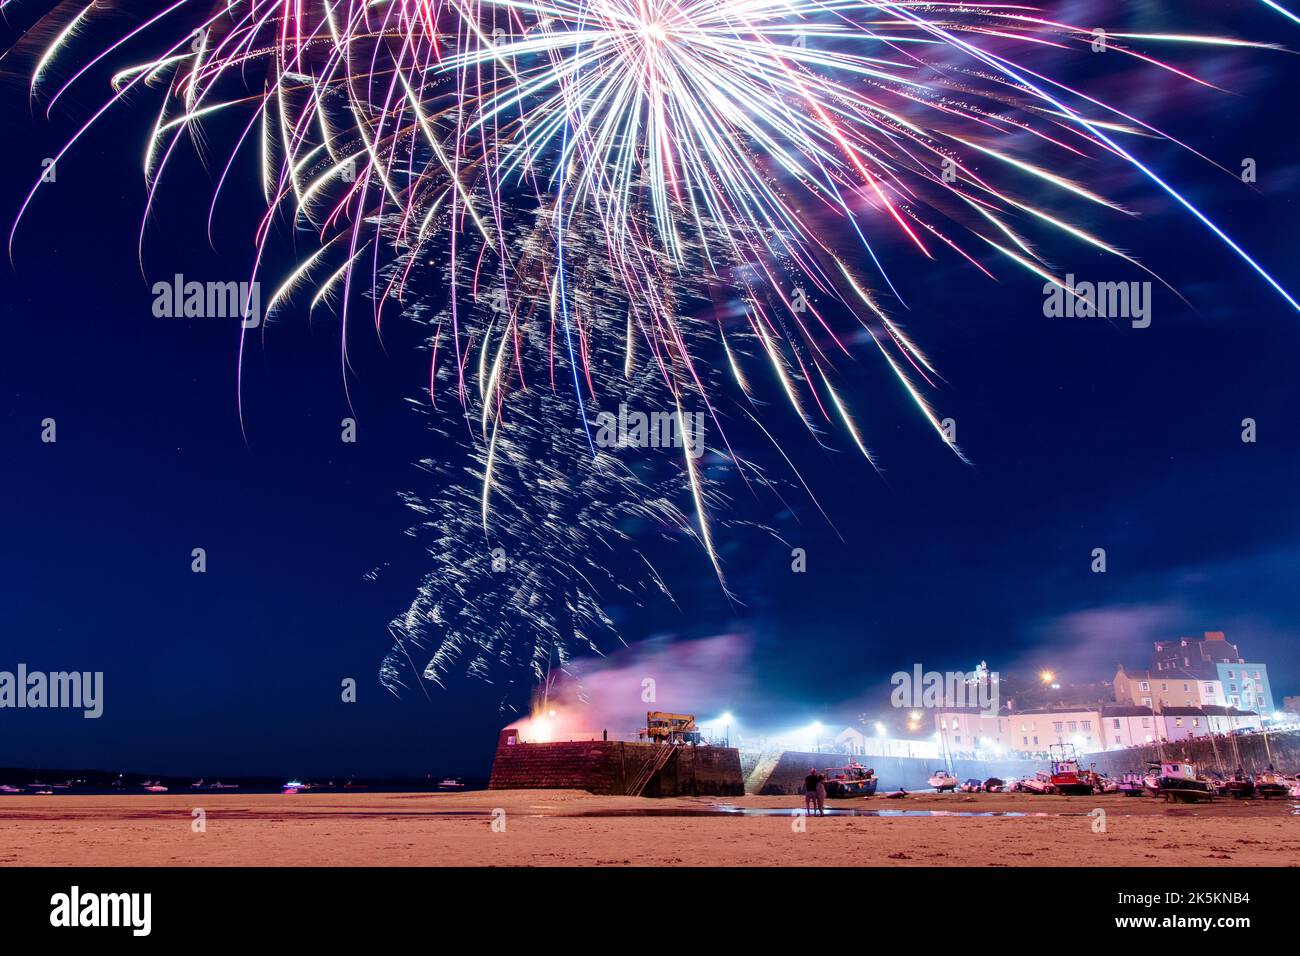 Rotary Club Fireworks Display, Tenby Harbour, Galles occidentale. Foto Stock